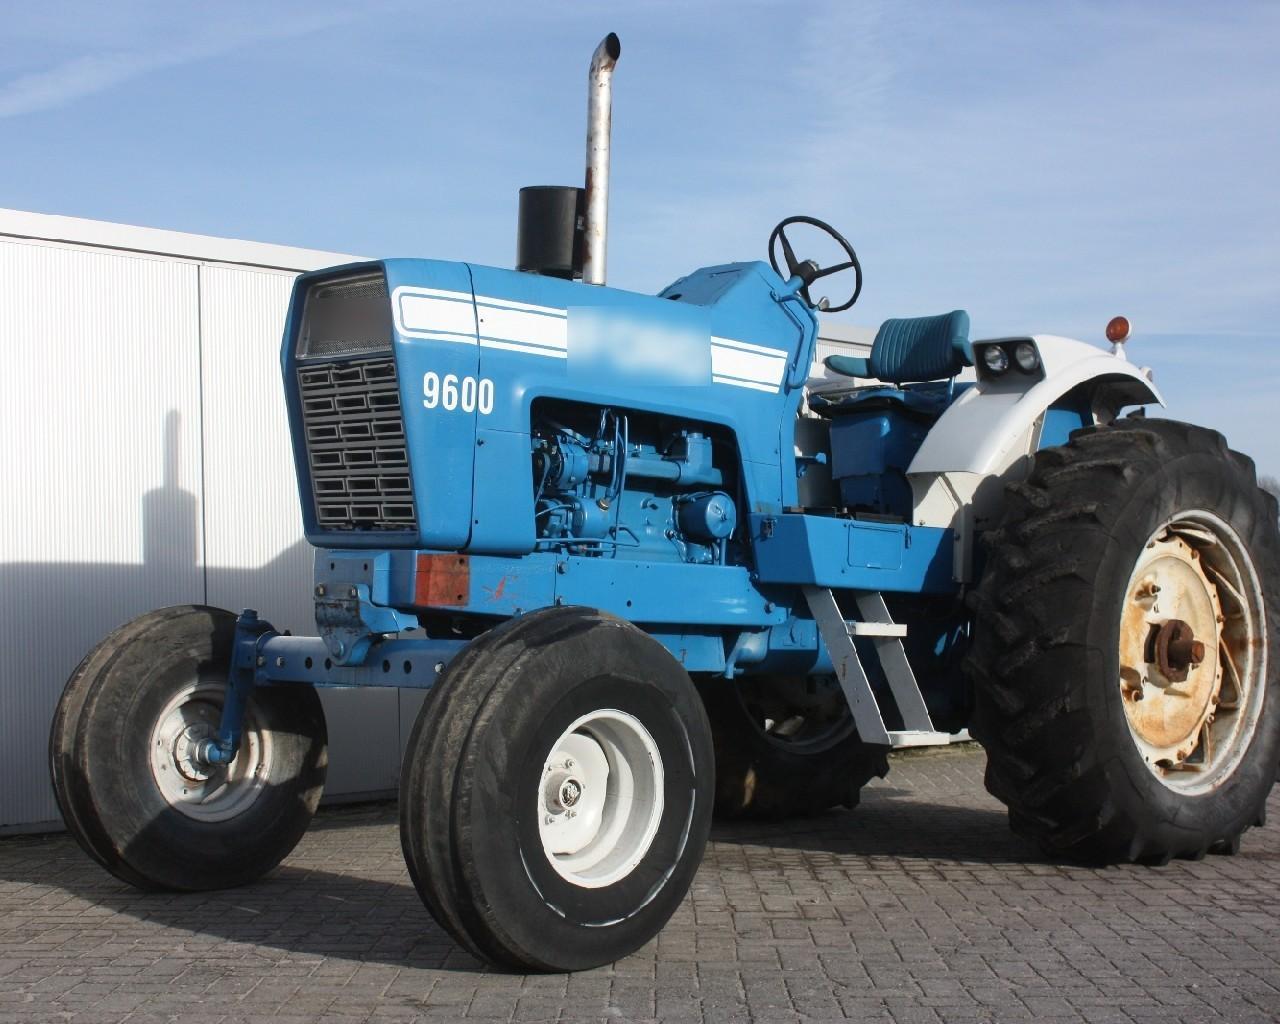 Used Ford 3600 Tractors for sale in Bathinda Punjab AdGeen